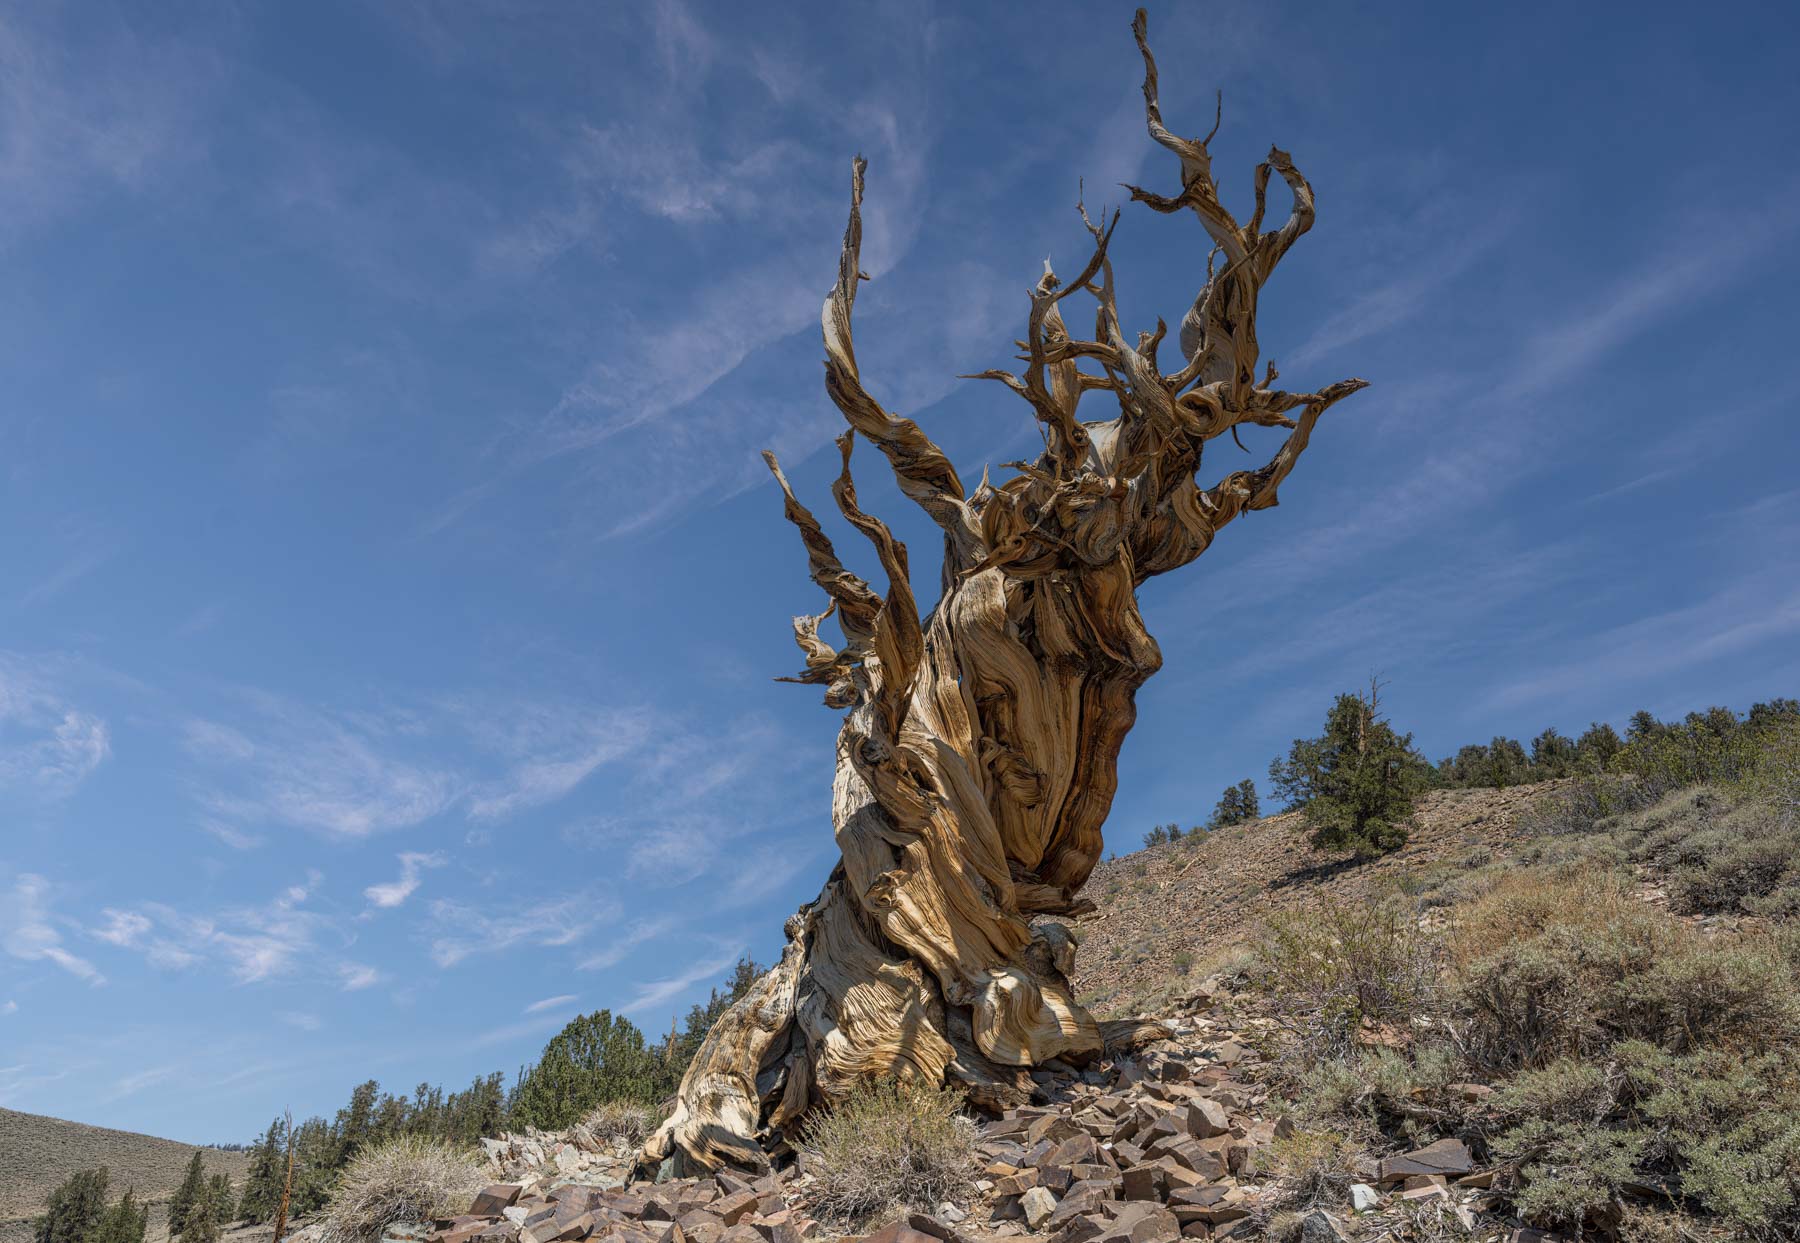 The Centennial Tree in the Schulman Grove of the Bristlecone Pines